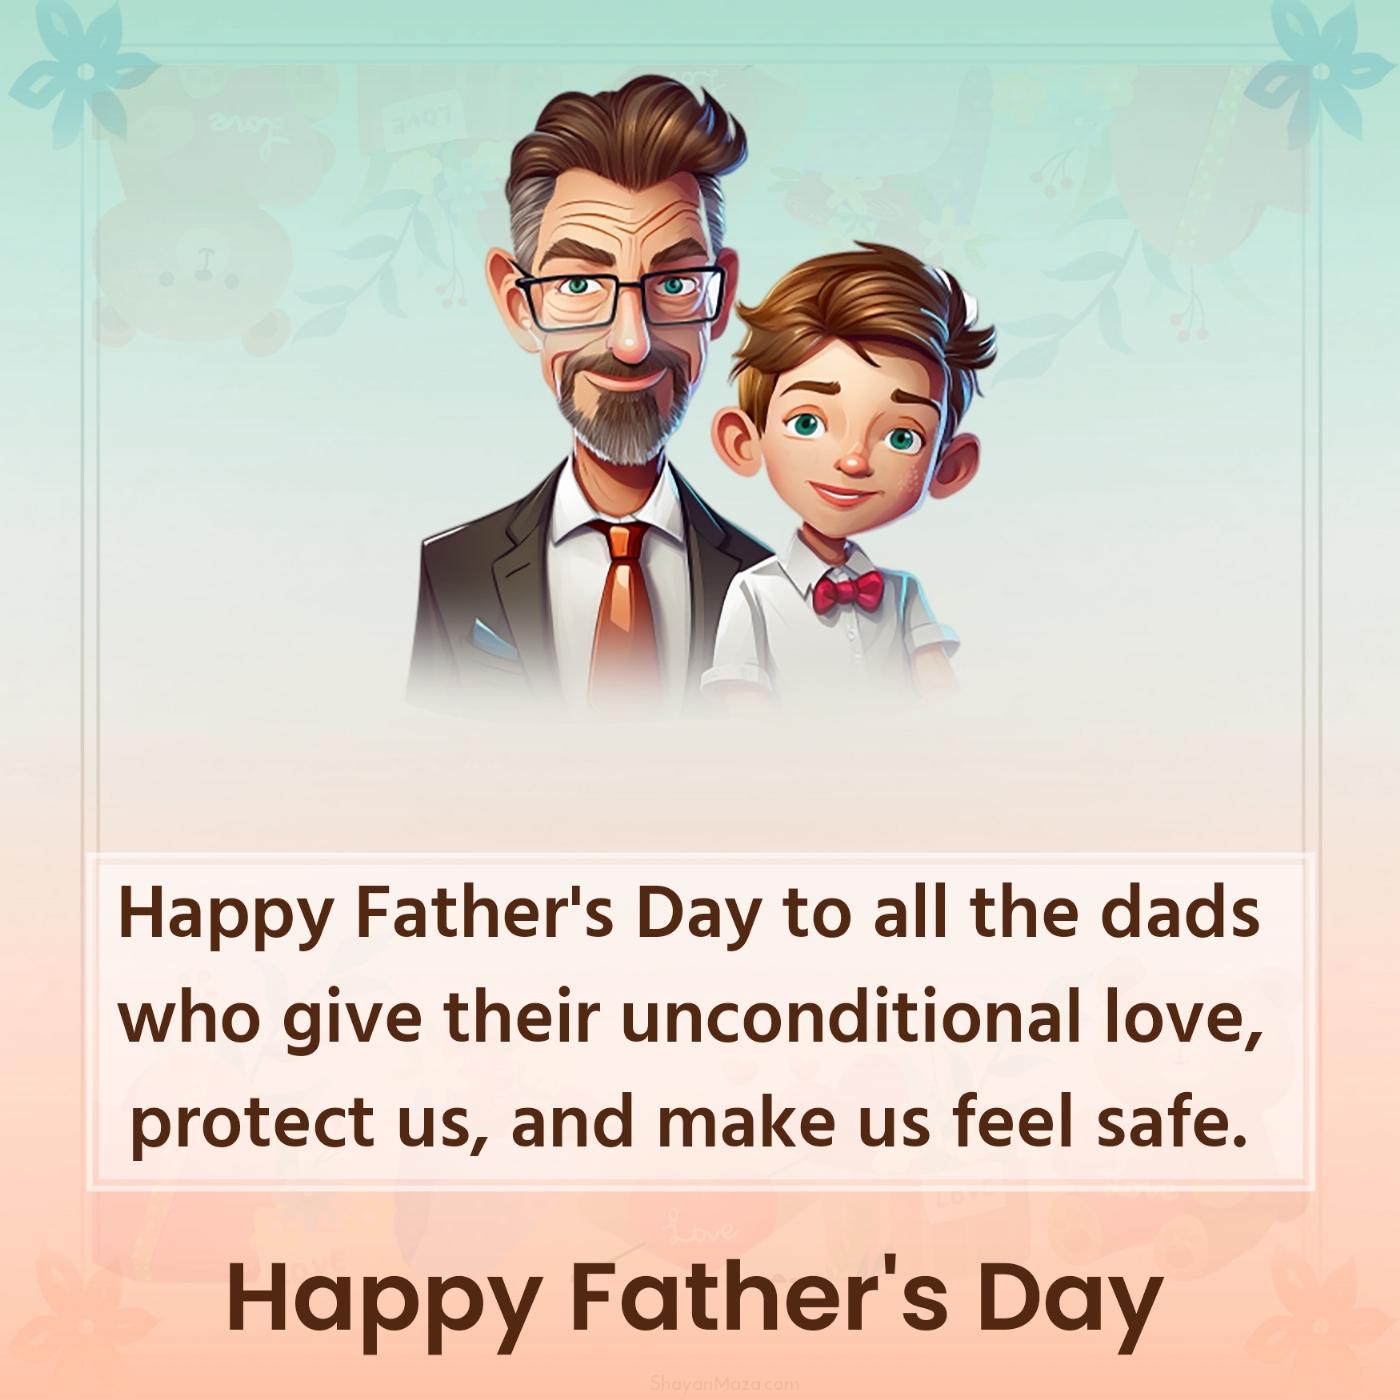 Happy Father's Day to all the dads who give their unconditional love